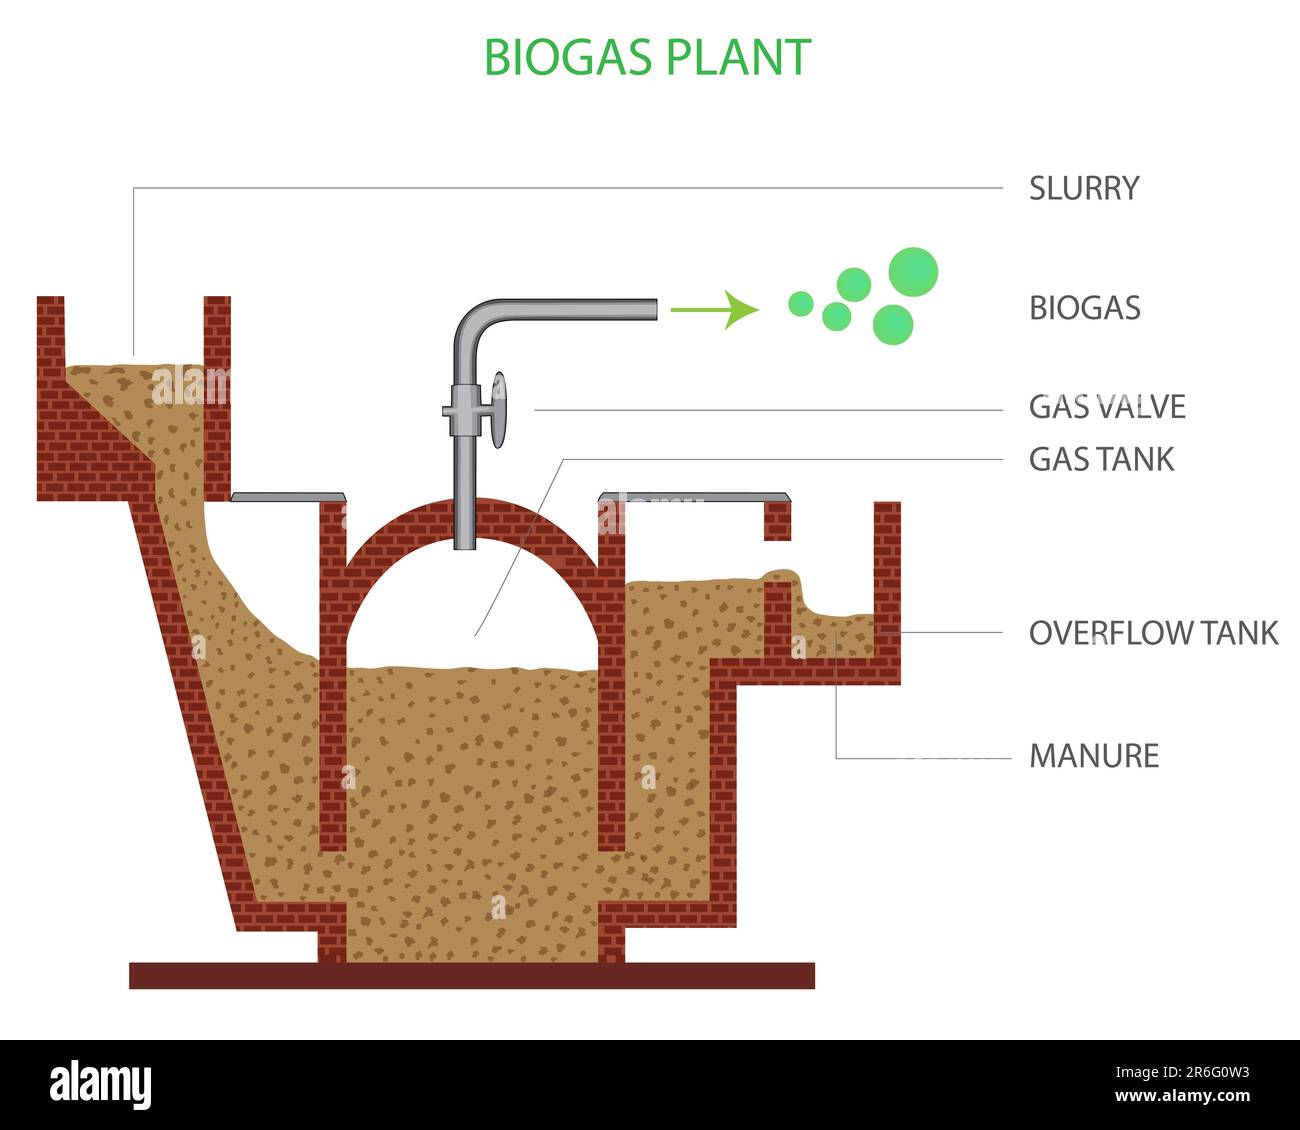 You have been deputed by your school principal to train local villagers in  the use of biogas plant. With the help of a labelled sketch explain the  various parts of the biogas